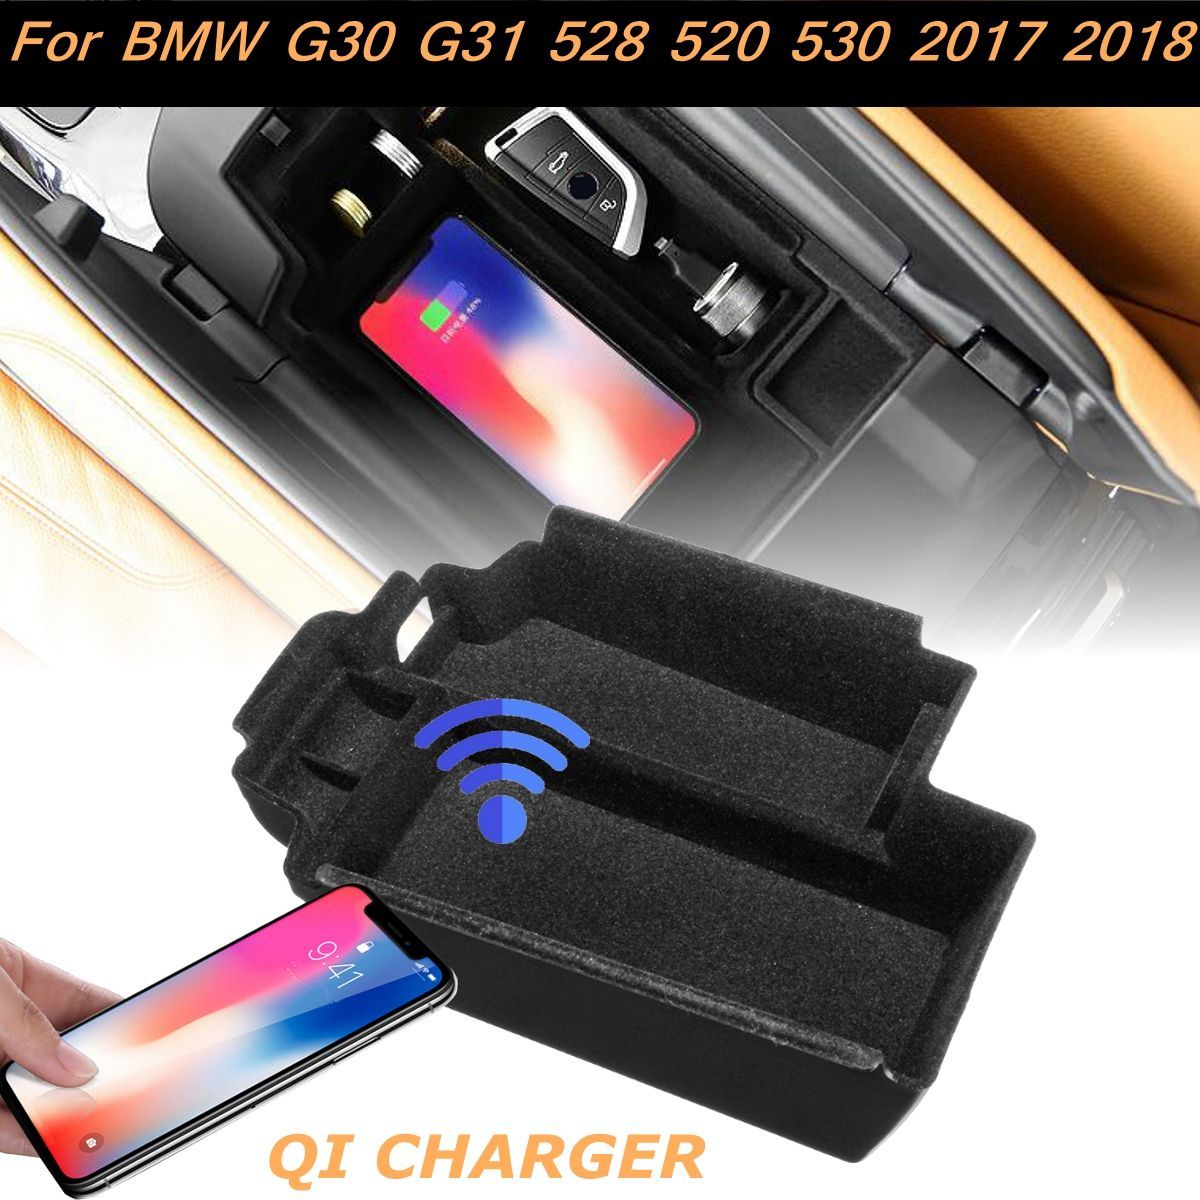 Phone-Wireless-Car-Charger-Central-Armrest-Storage-Box-For-G30-G31-5-Series-17-18-1424944